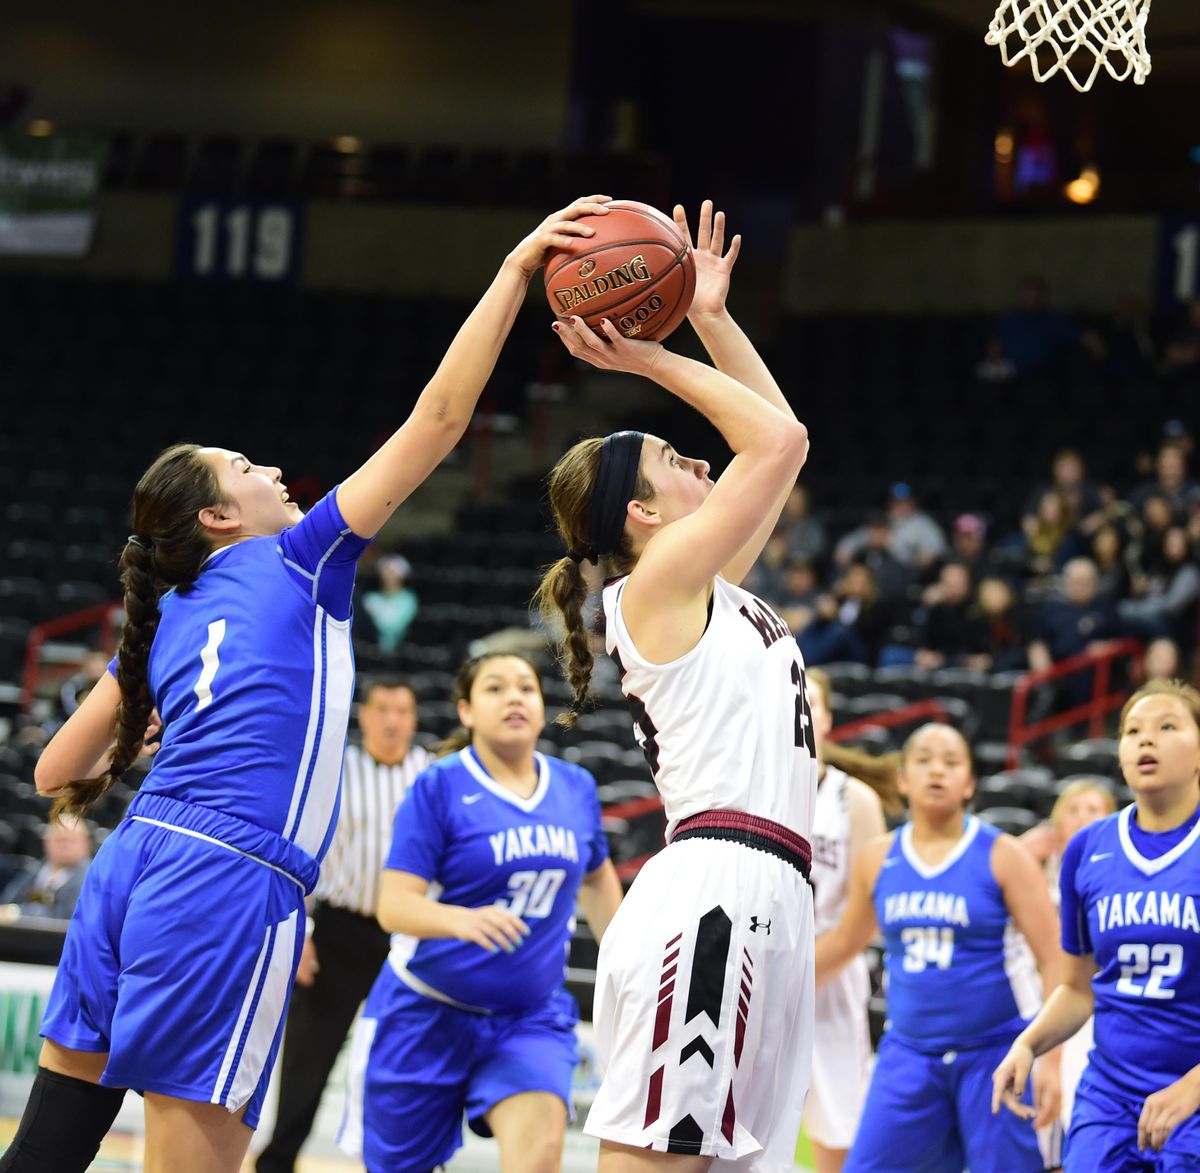 1b Girls Almira Coulee Hartline Vs Yakama Nation Tribal School March 1 March 1 2017 The